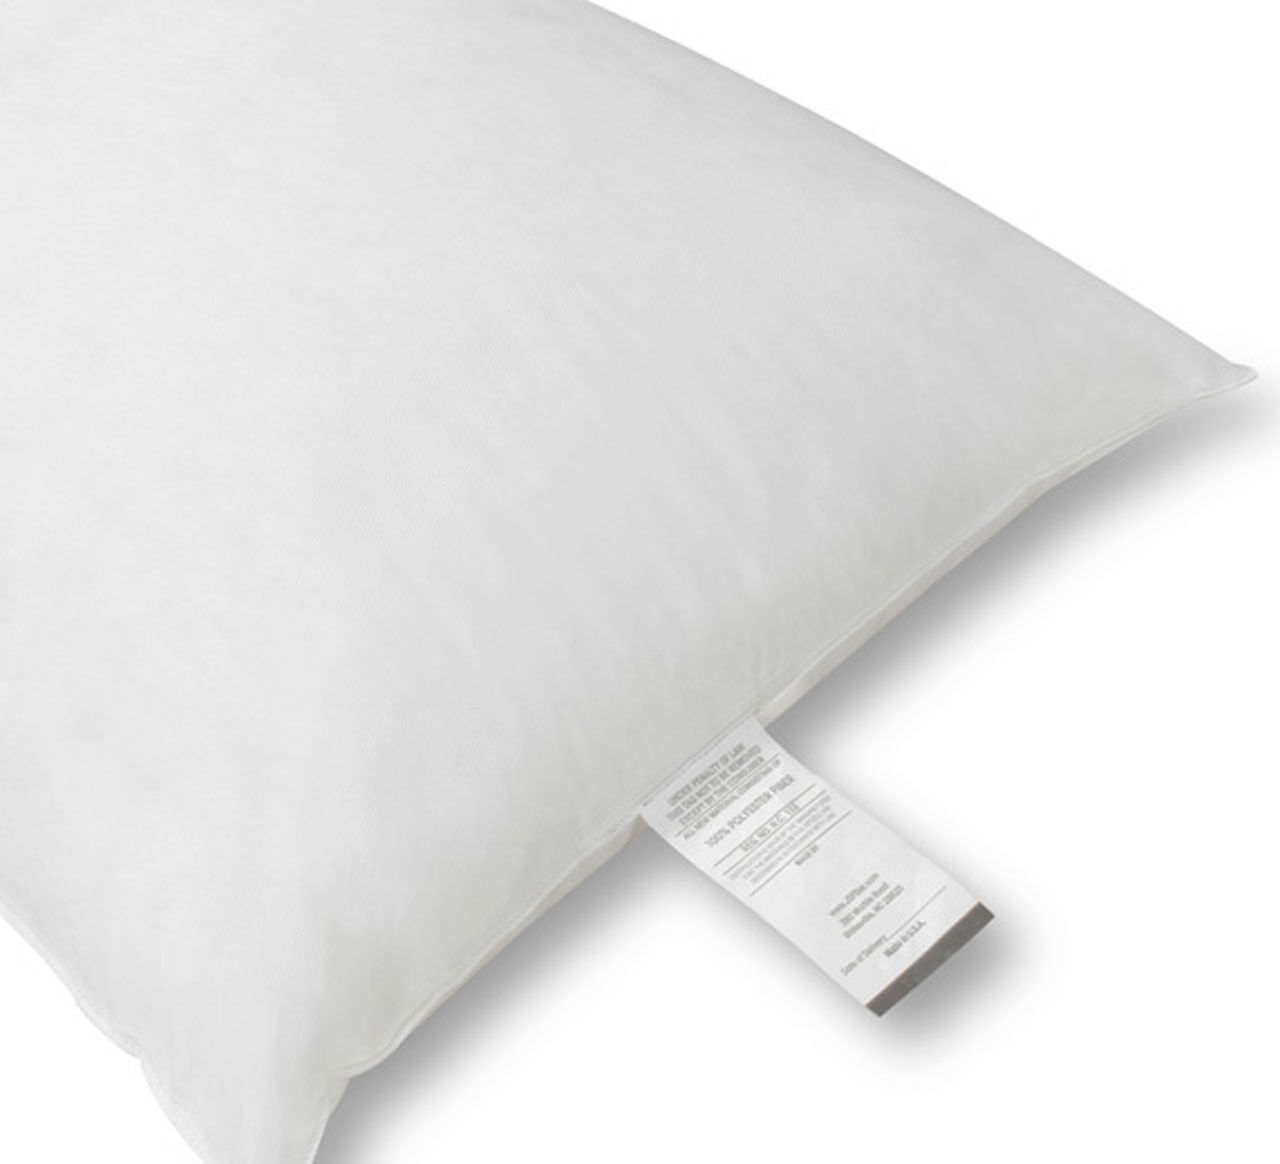 DAYS INN Pillow Questions & Answers